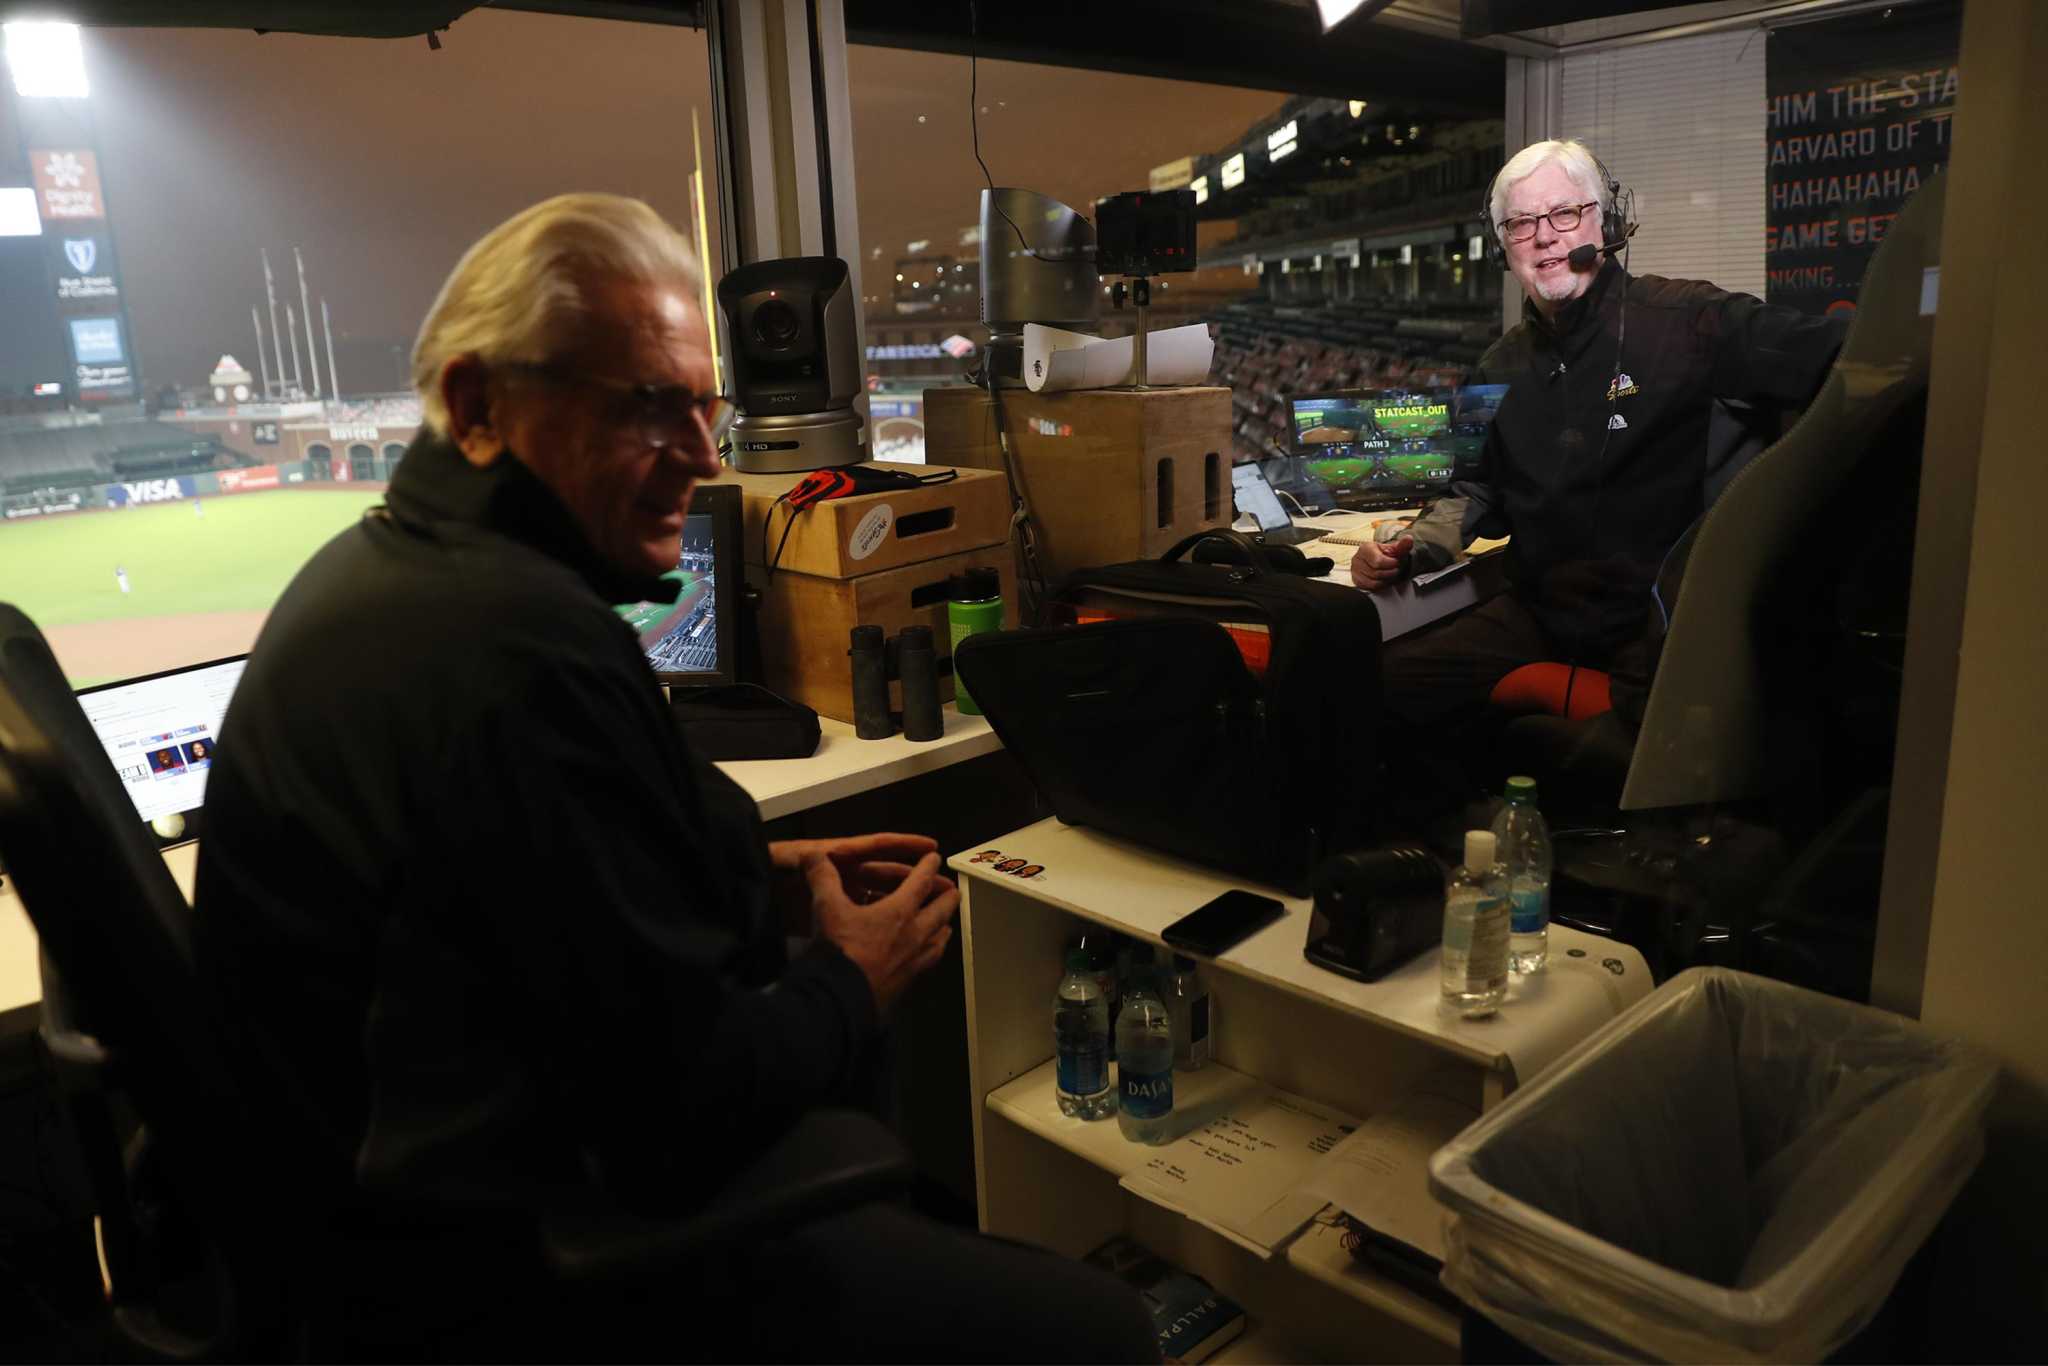 Giants-Dodgers Heres how to listen to Kruk and Kuip while watching the TBS broadcast